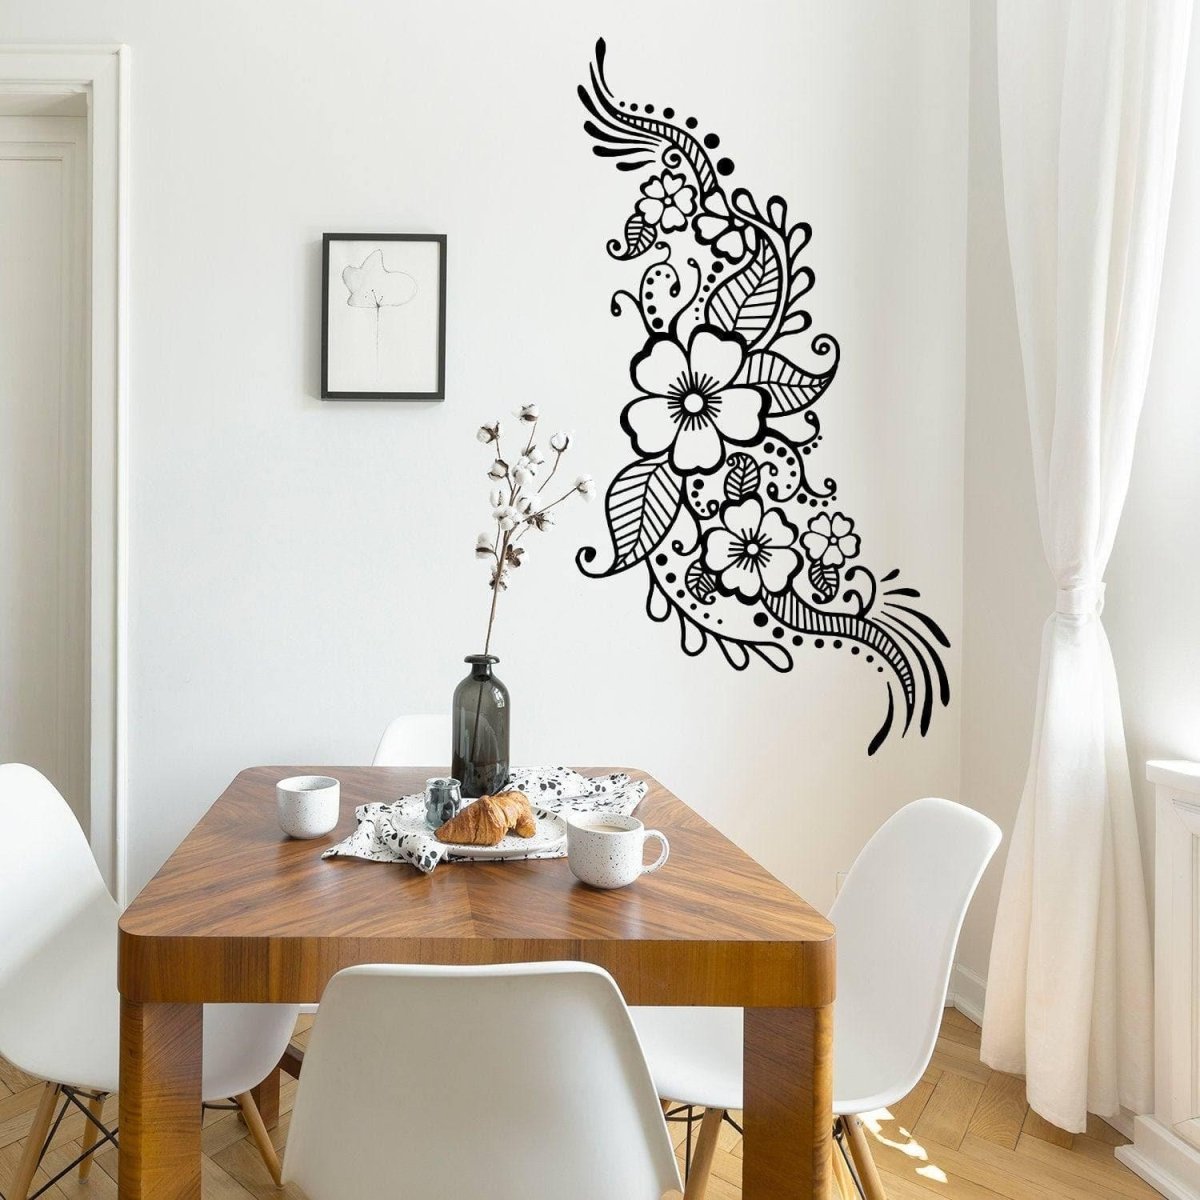 Vinyl Wall Decal Sticker Swirly Hibiscus Osaa377s - Etsy | Stencil  patterns, Wall decal sticker, Flower drawing